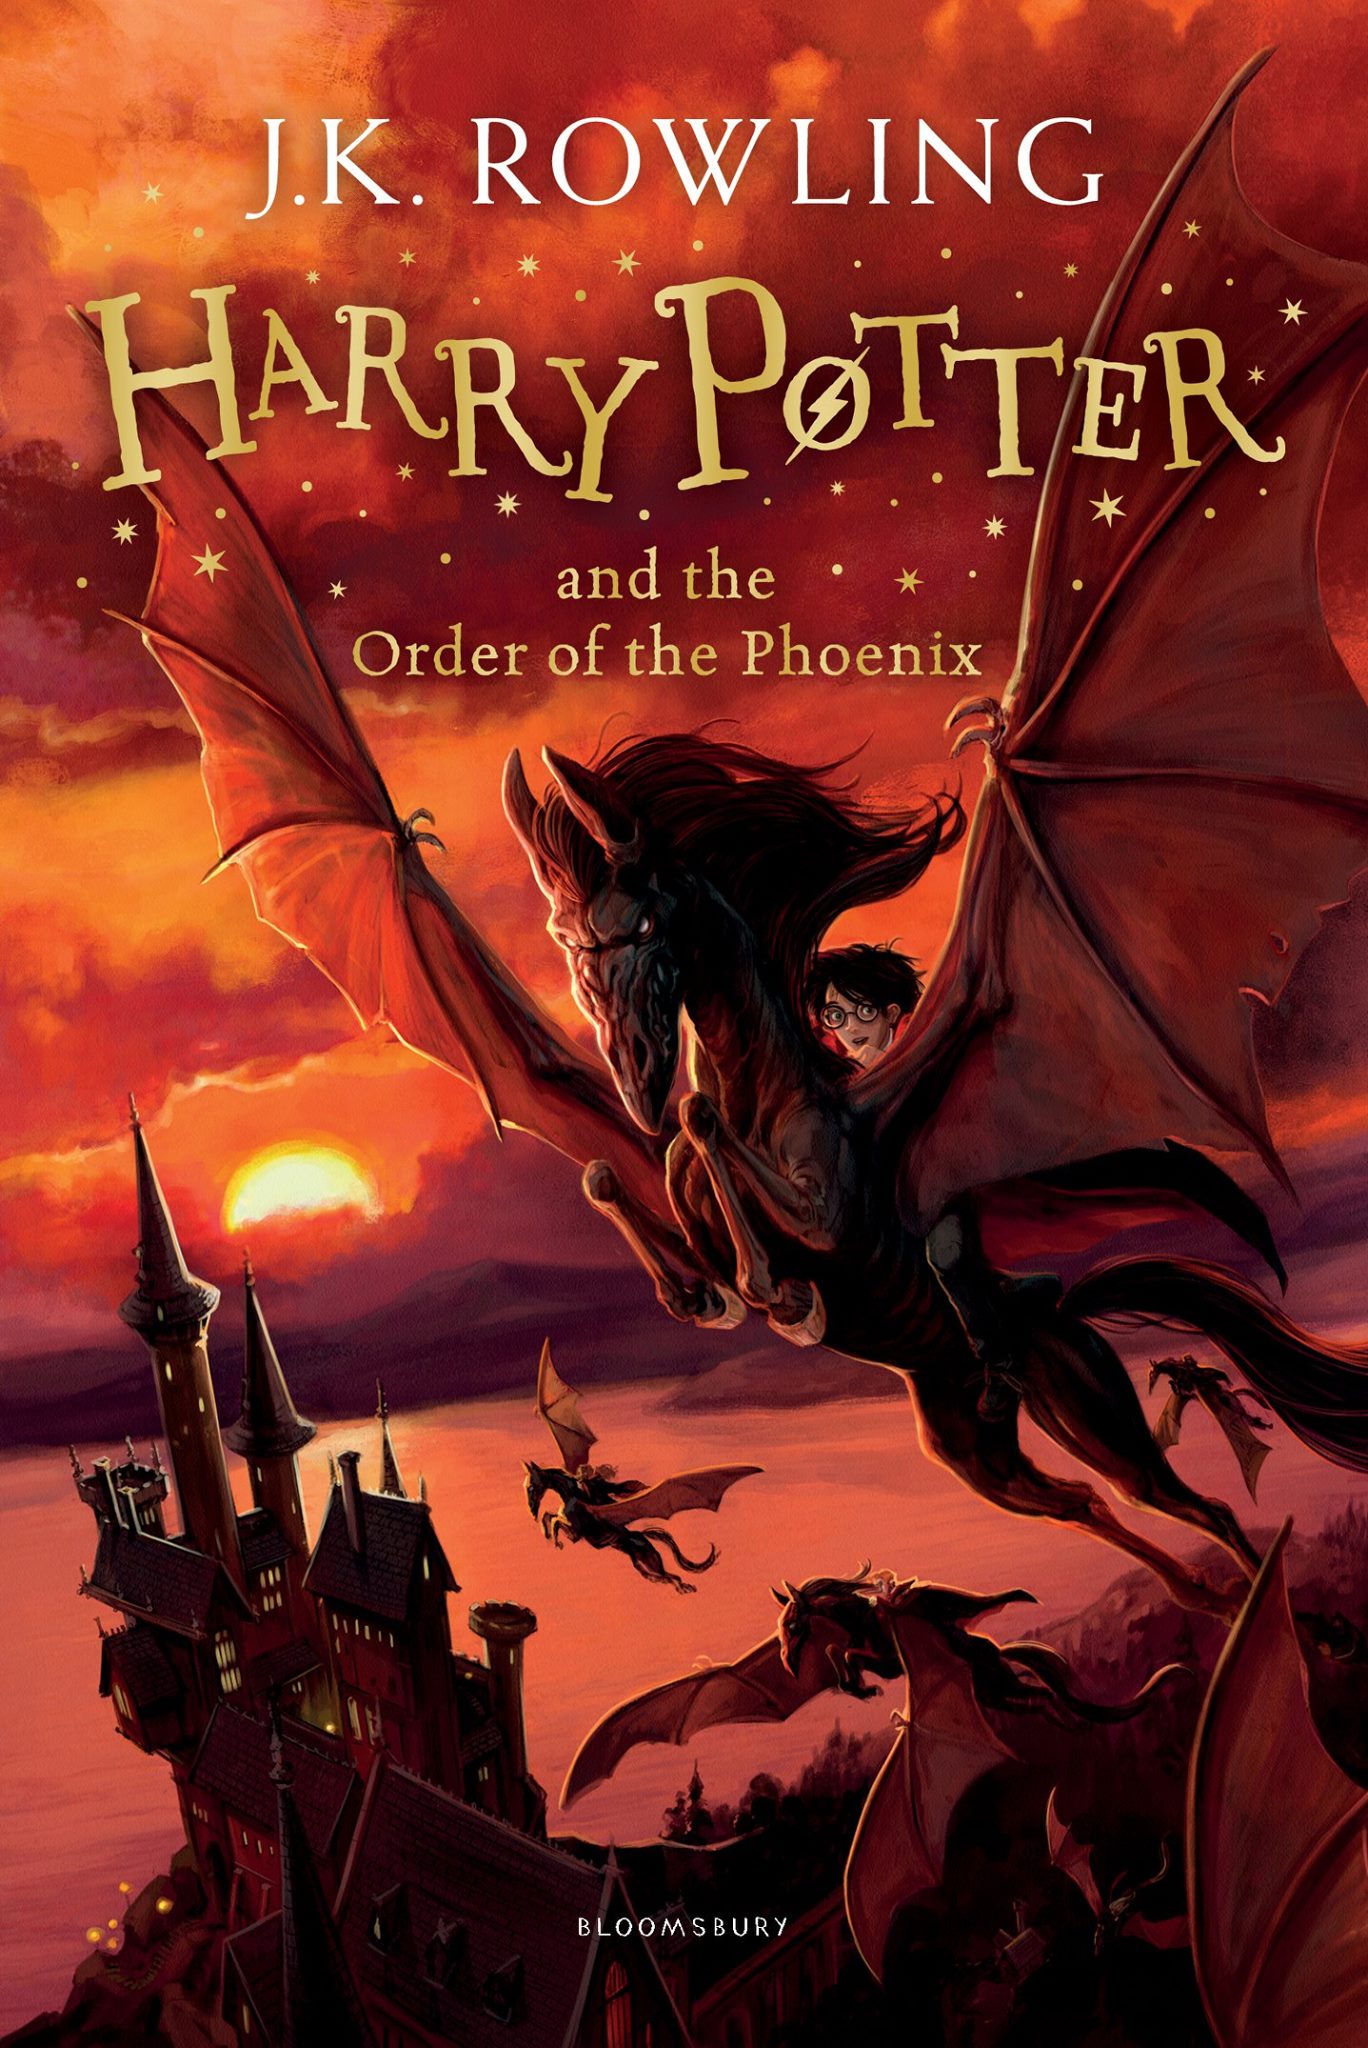 watch harry potter order of the phoenix free